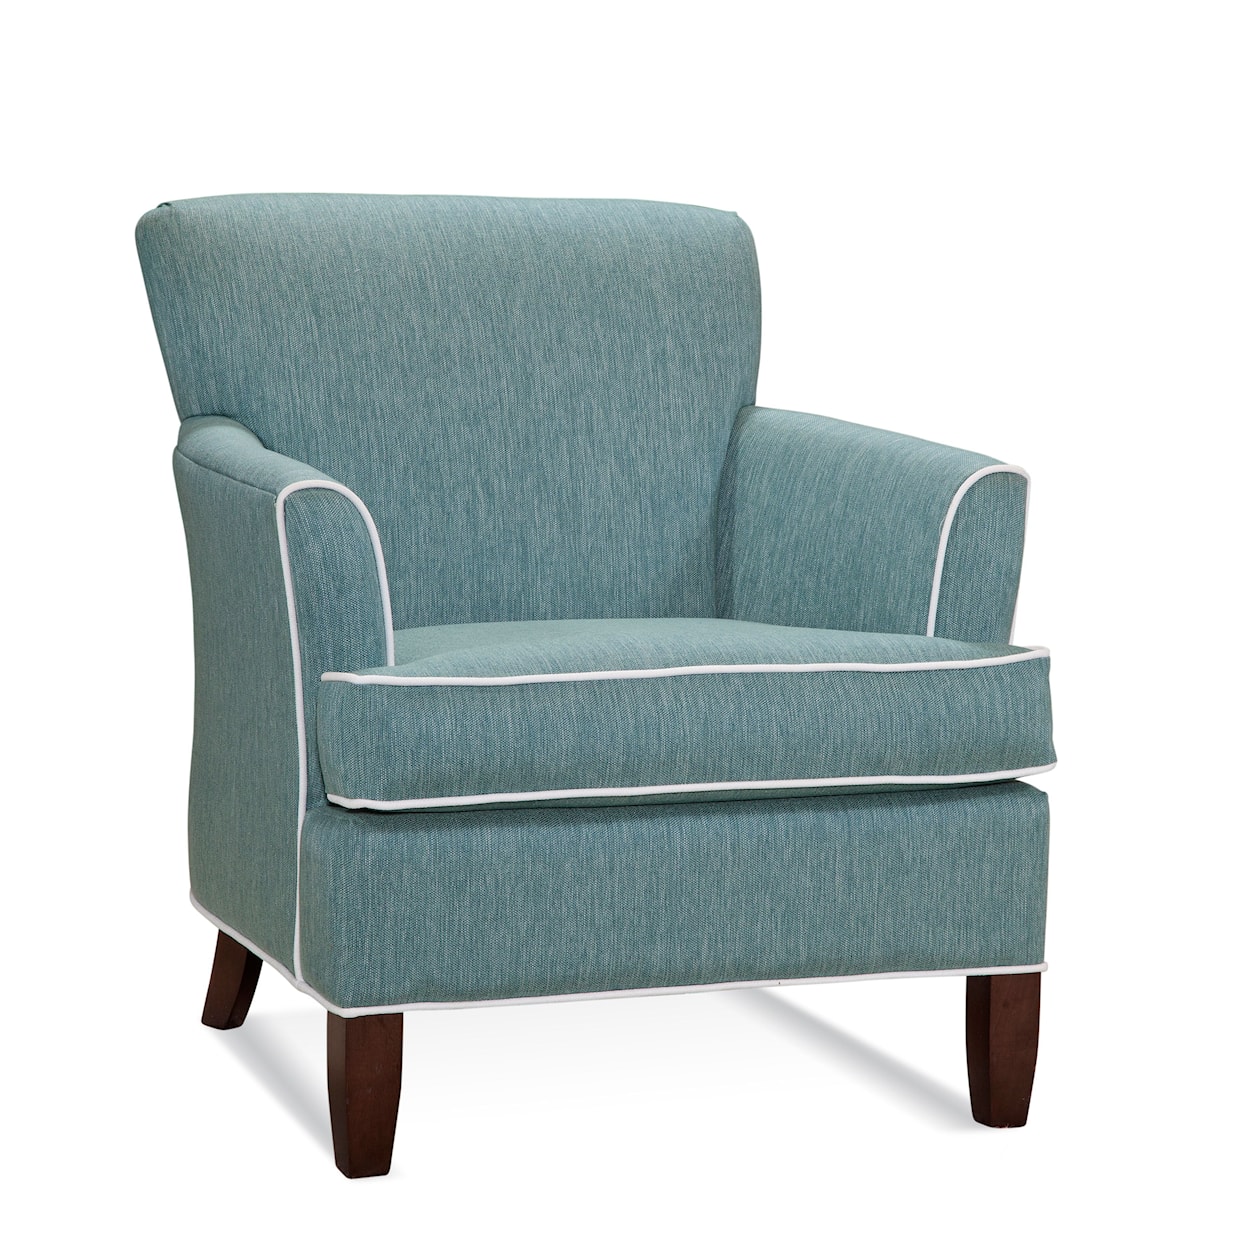 Braxton Culler Accent Chairs Sloane Upholstered Chair